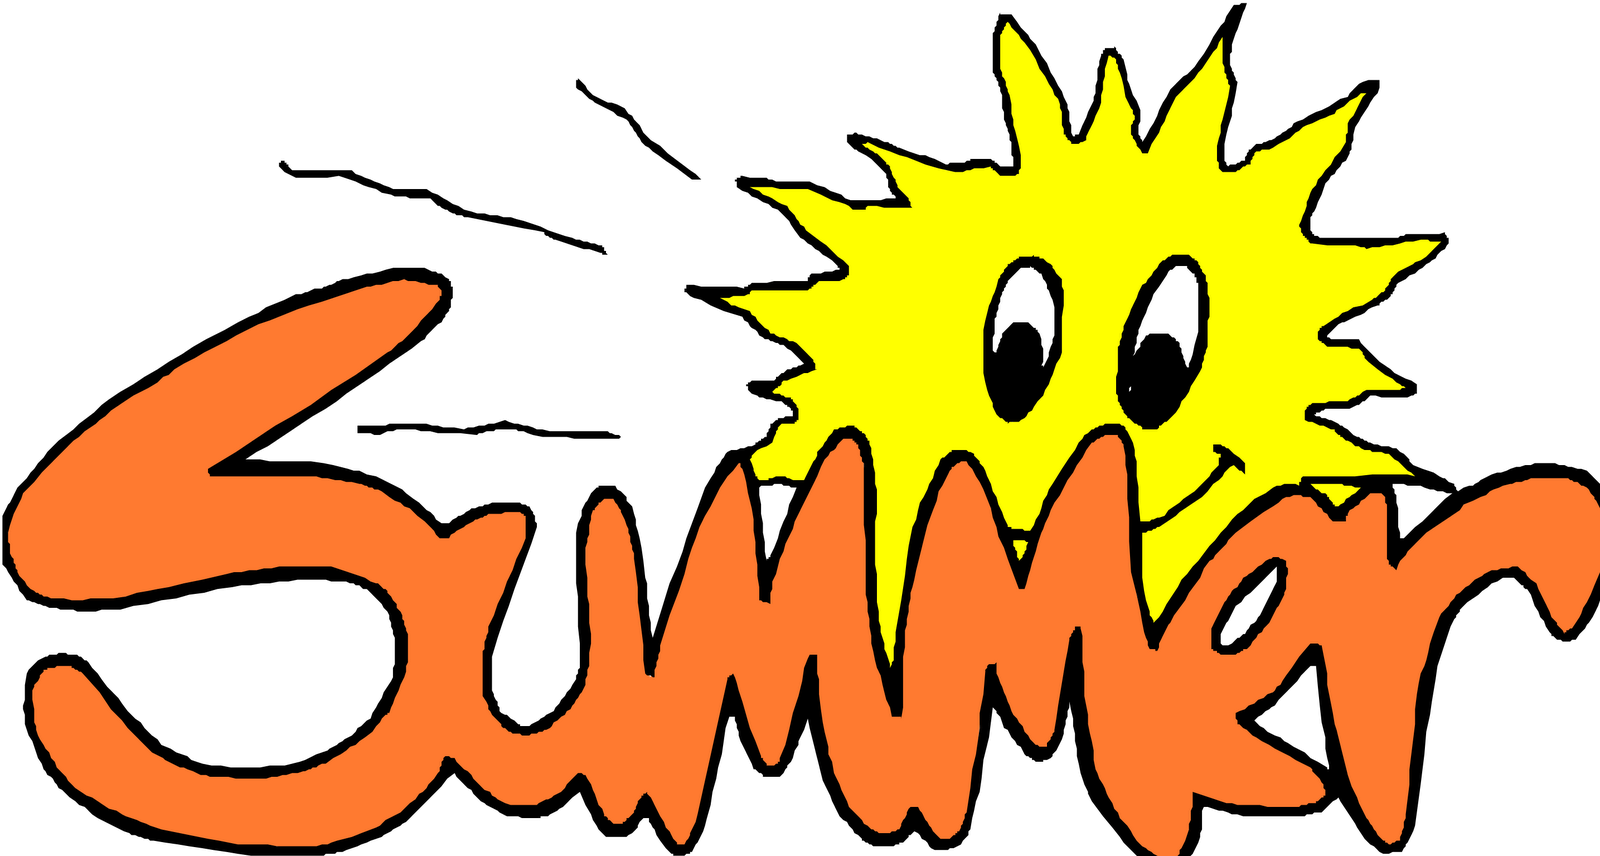 Summertime Clipart Black And White - Free Clipart ...